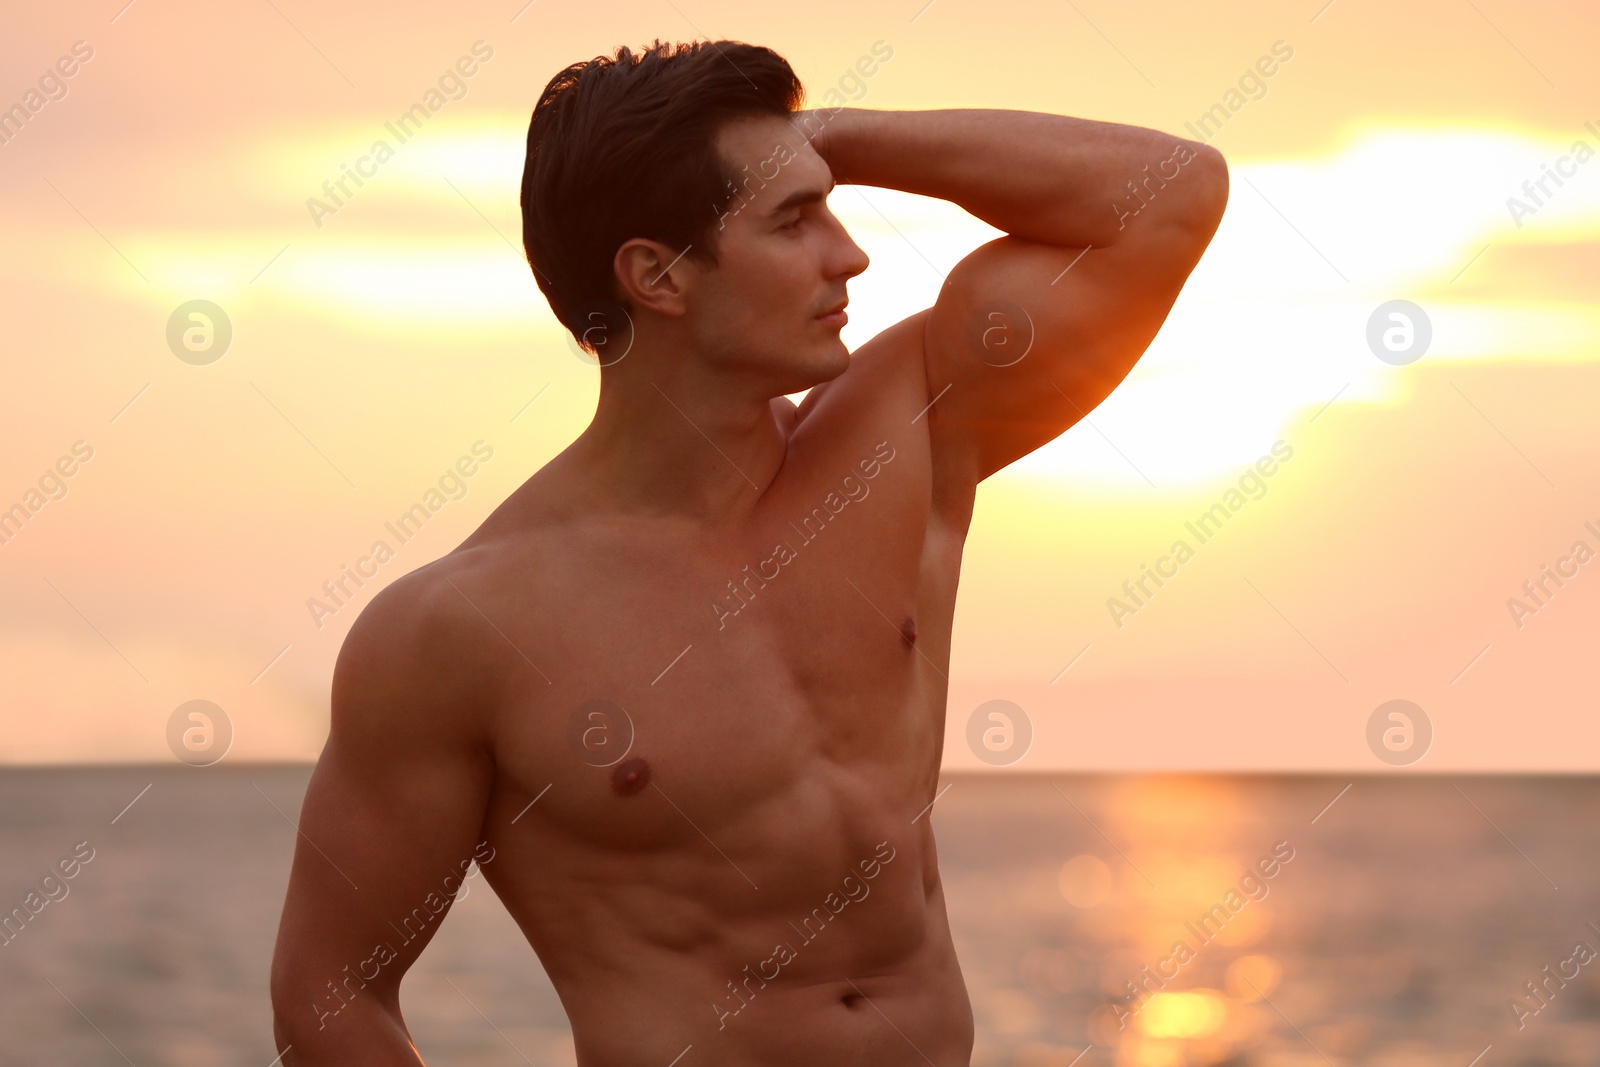 Photo of Handsome young man posing on beach near sea at sunset